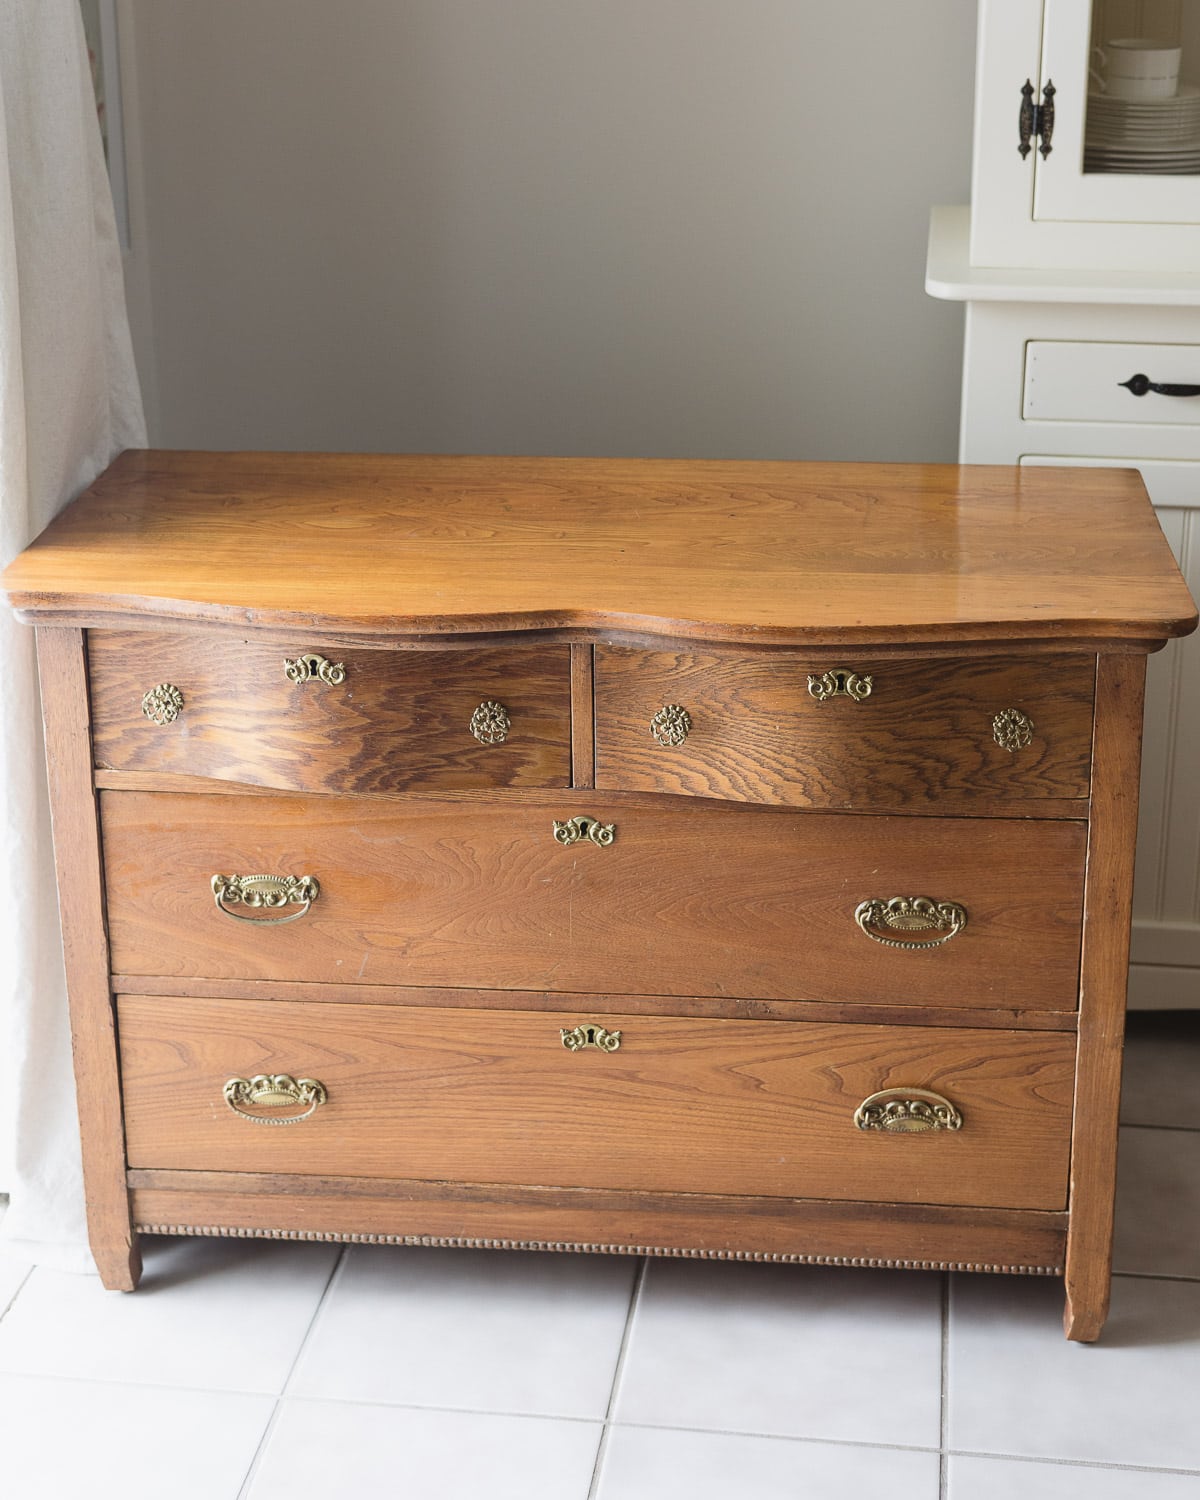 An old wooden dresser with brassy knobs, pulls, and keyholes.